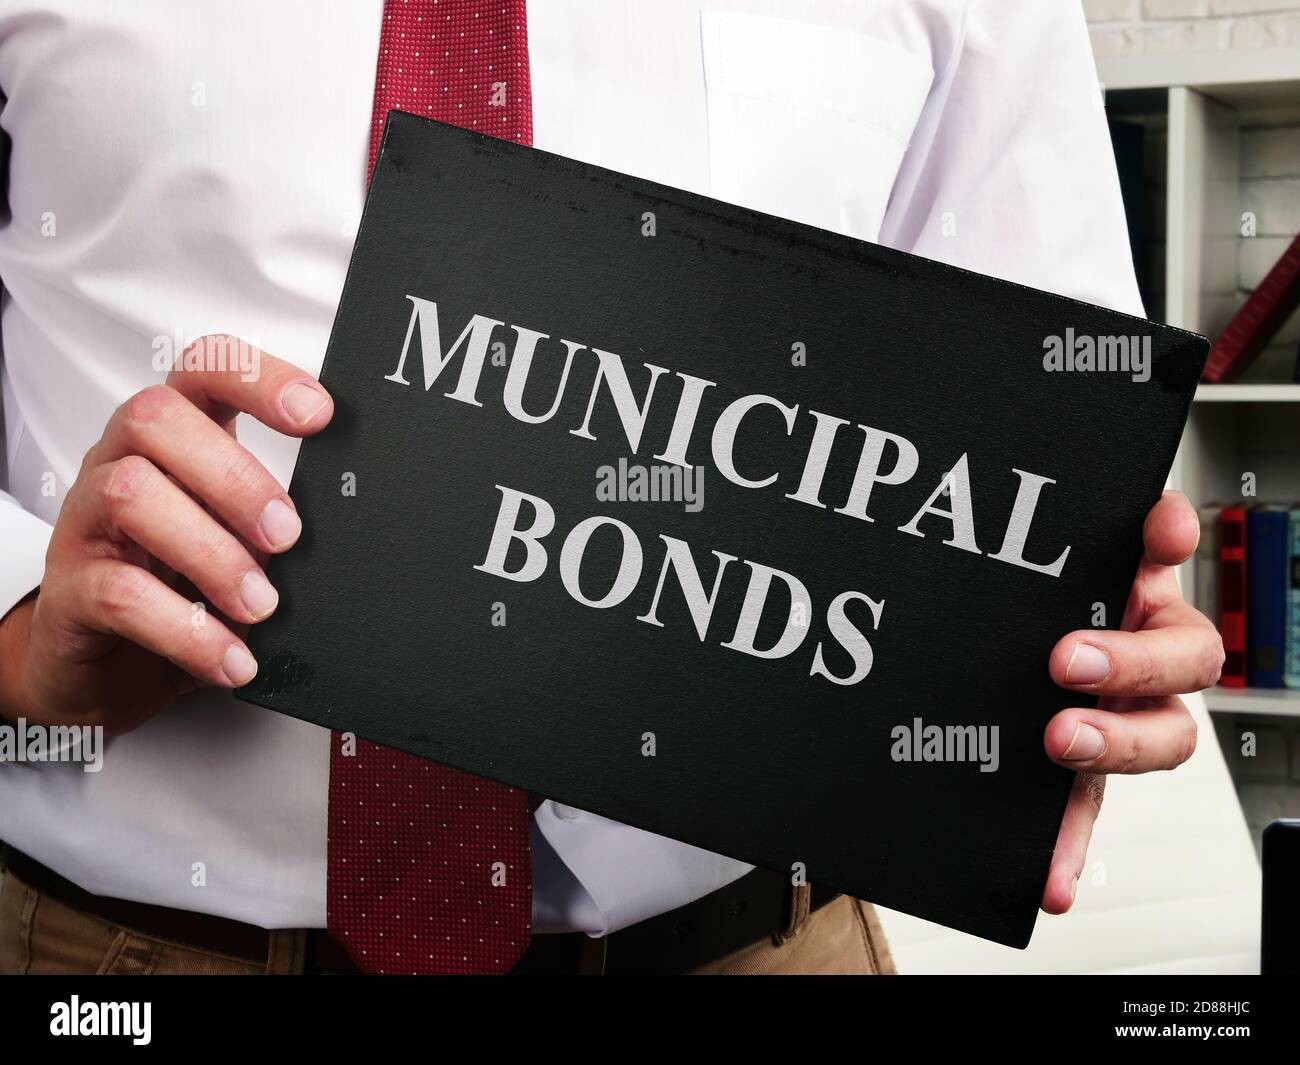 Manager shows plate with municipal bonds sign. Stock Photo